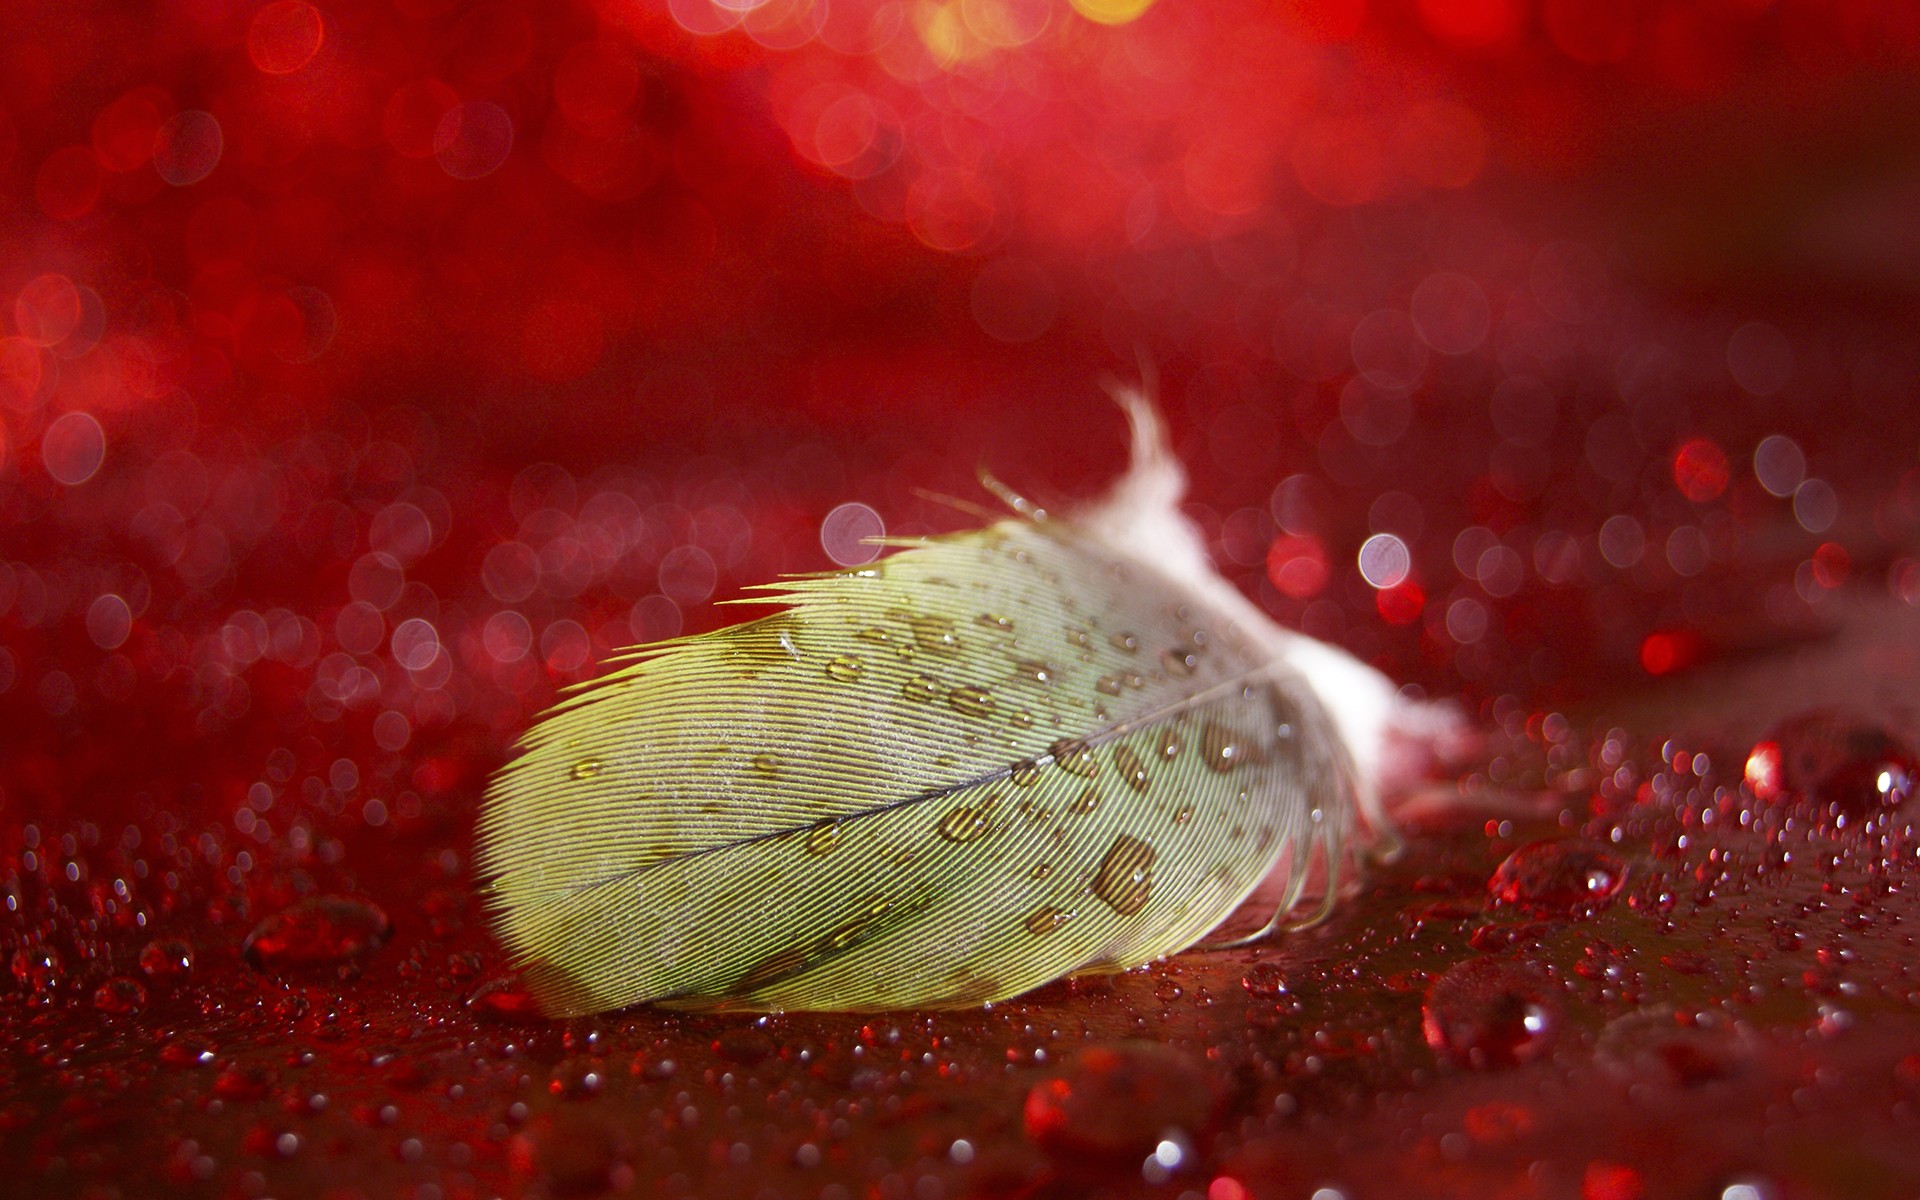 feathers, Bokeh, Water drops, Red background Wallpaper